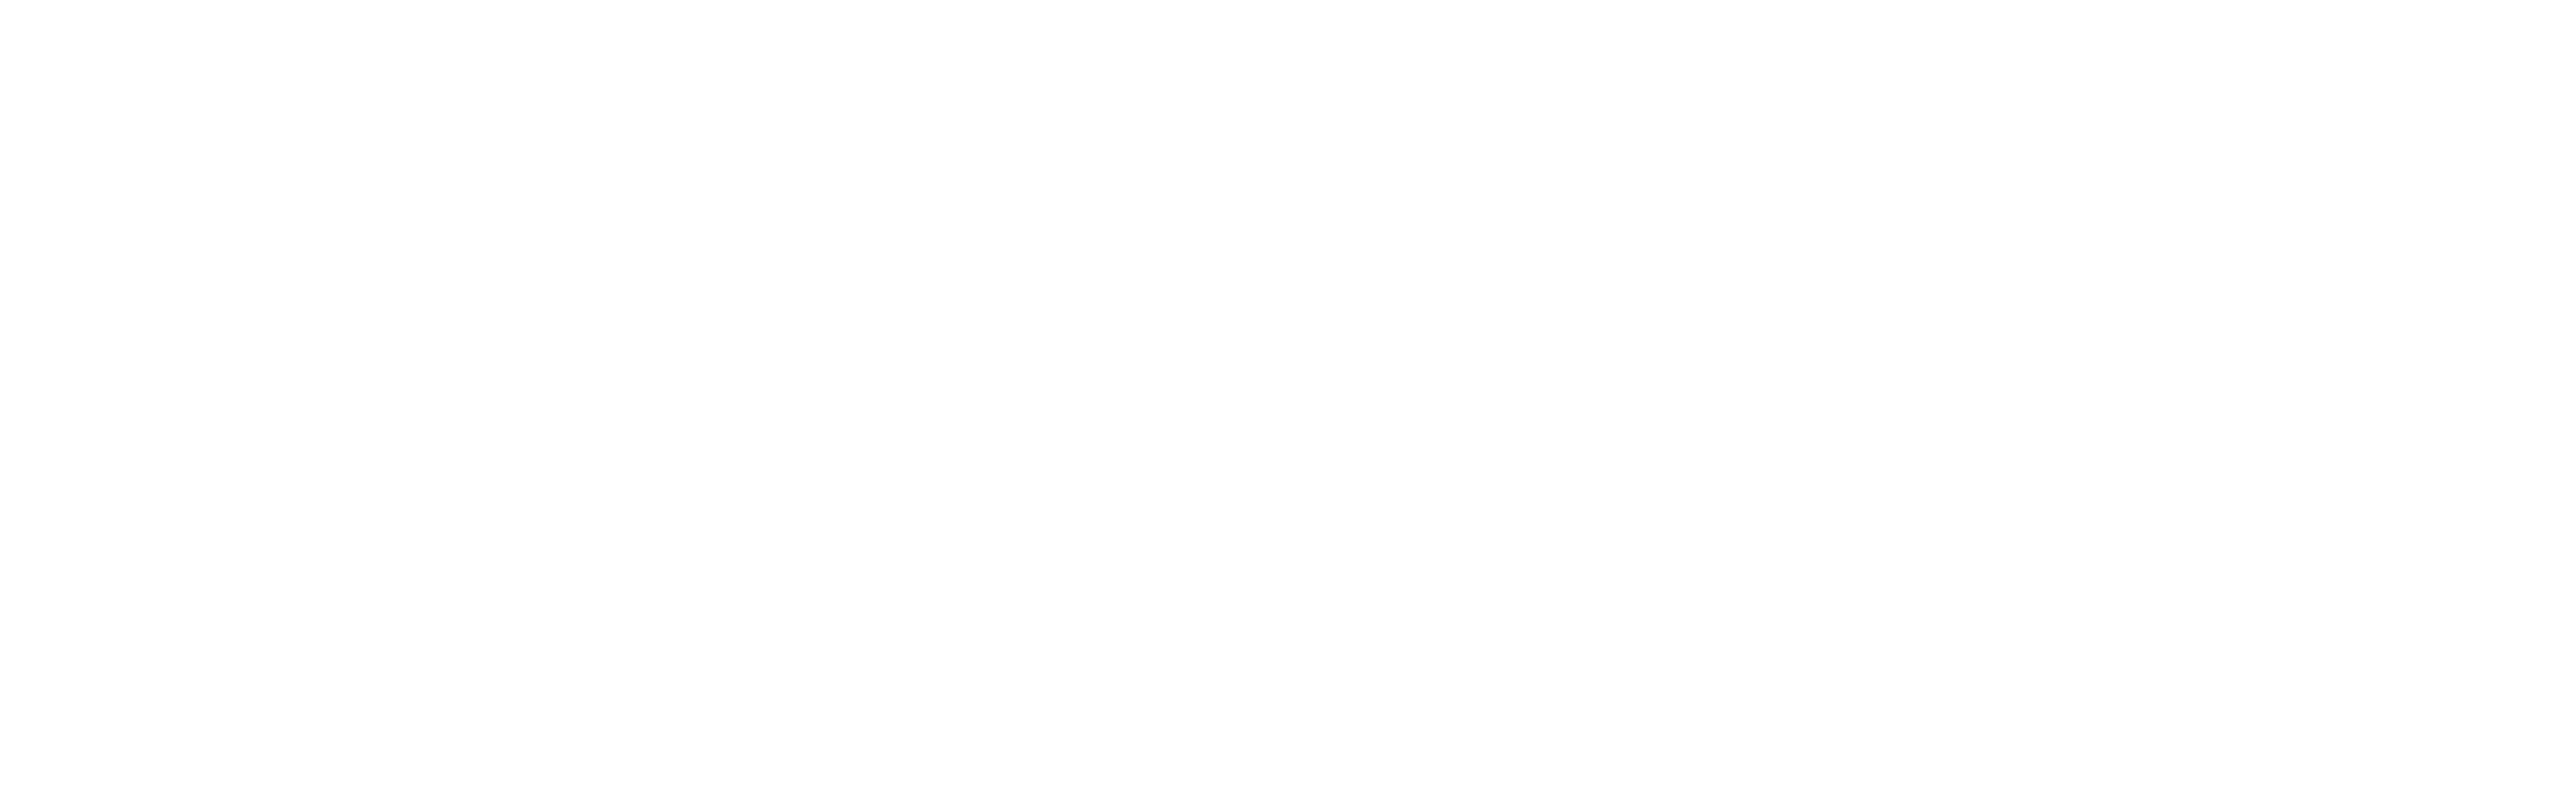 The Woman in Red logo